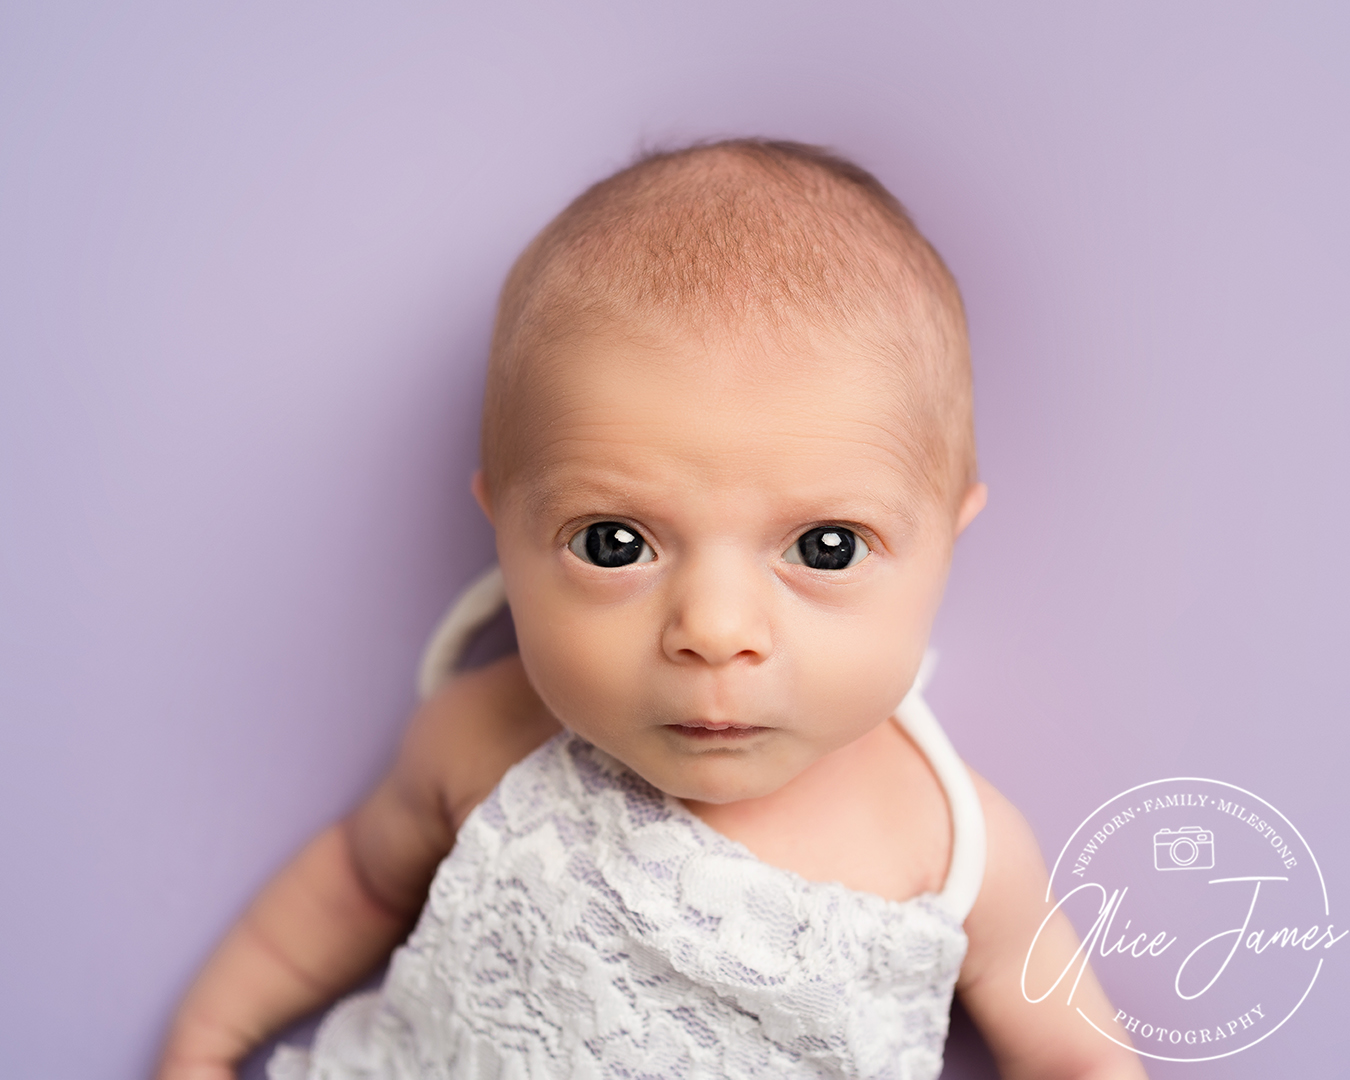 Baby girl awake, looking at the camera with wide open eyes. Taken at her newborn photoshoot Bedford.